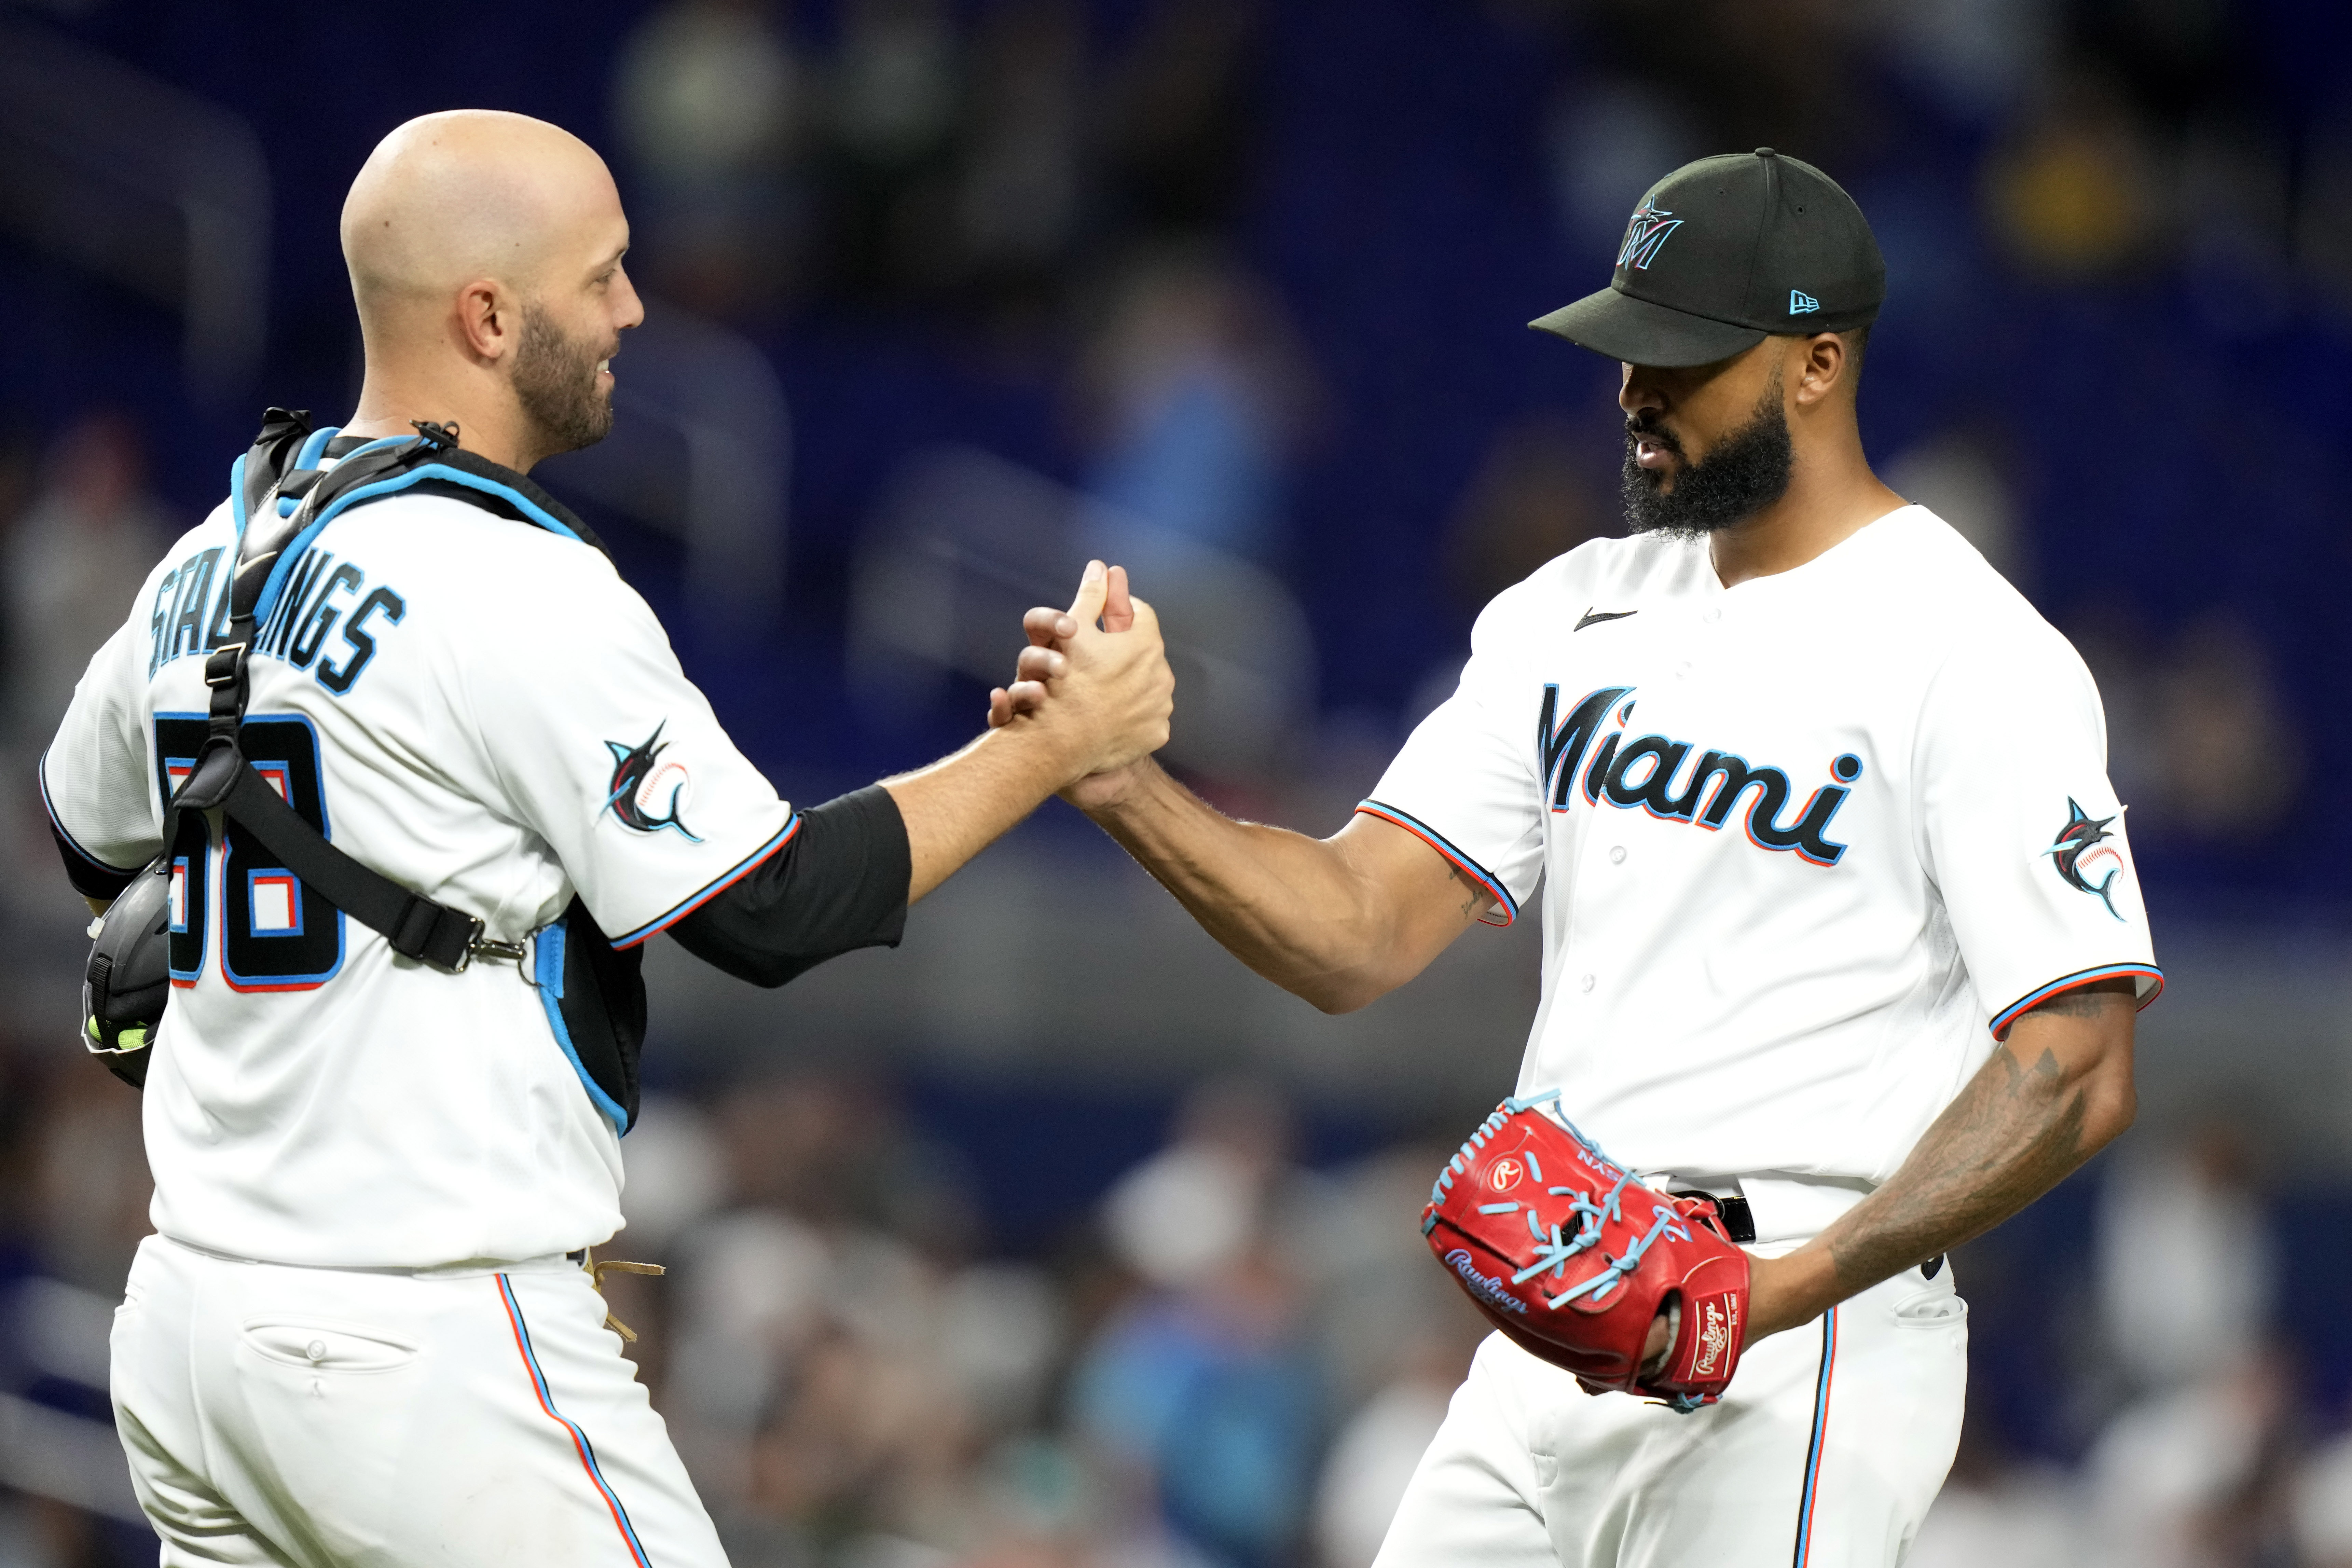 Four-run eighth wins game, series for Marlins against visiting Twins